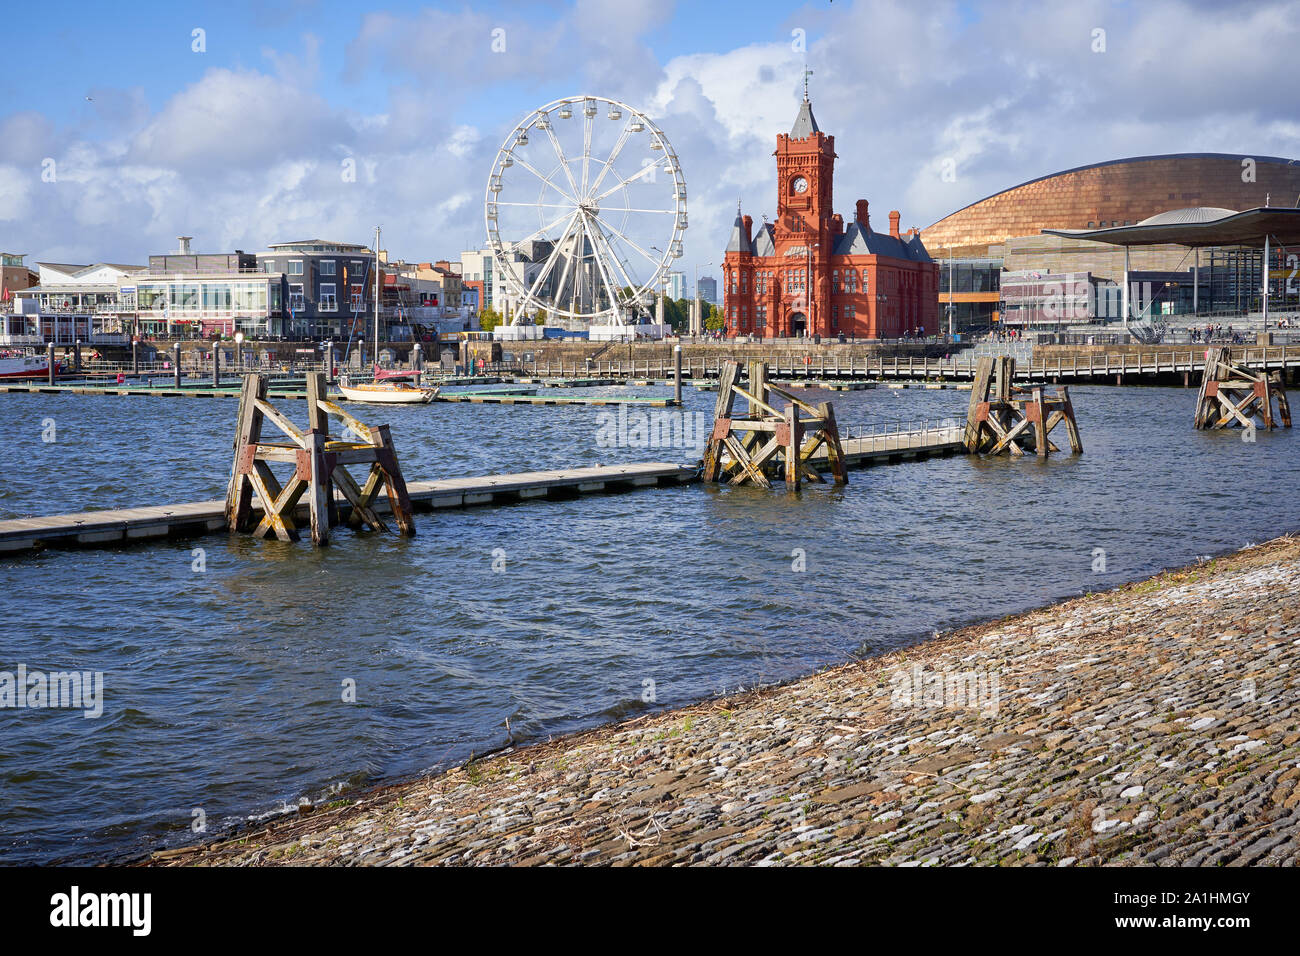 The Pierhead Building, Cardiff Bay, South Wales Stock Photo